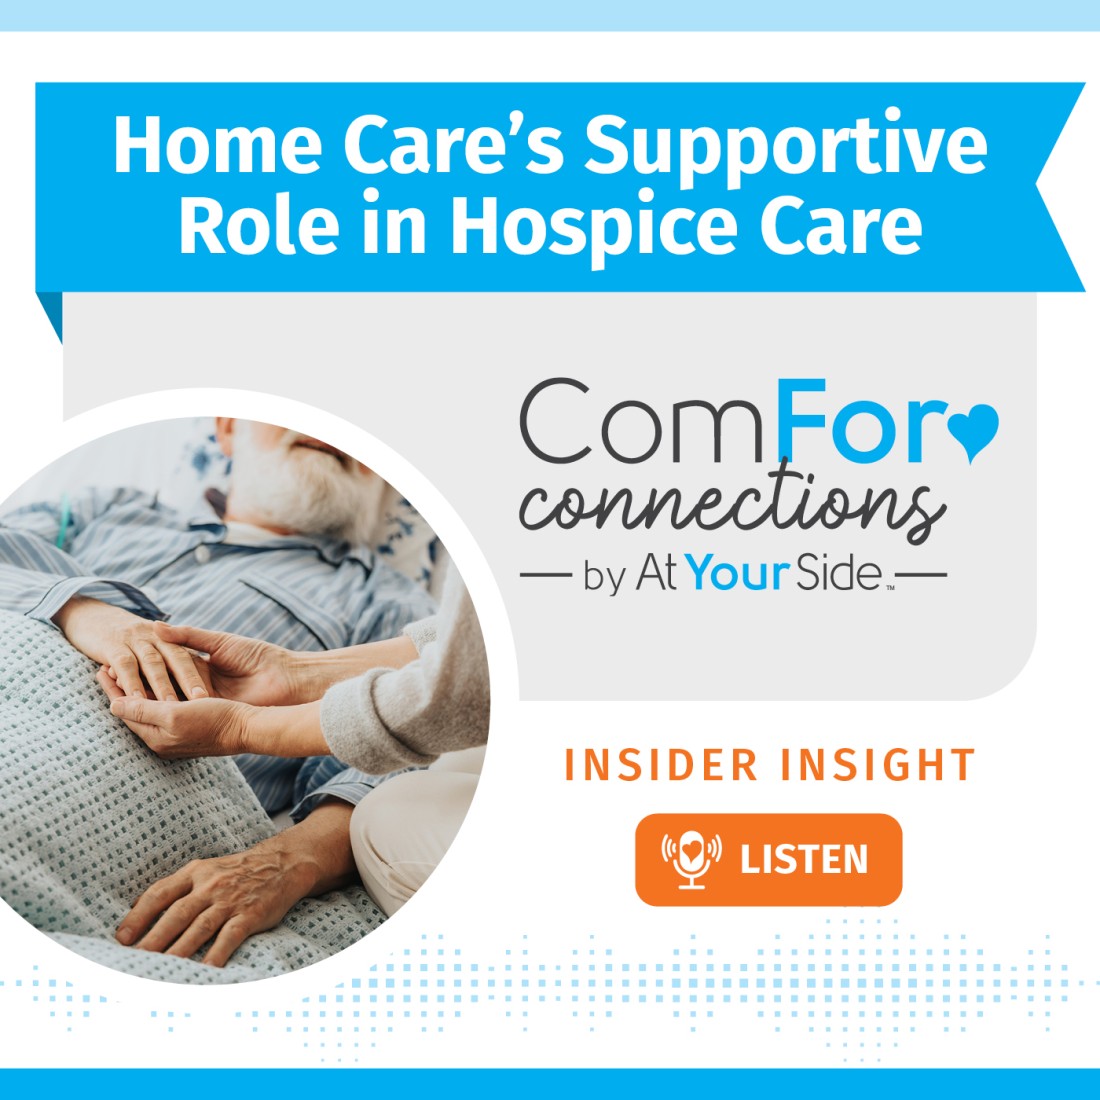 Podcast Resources: Expanding Your Home Care Knowledge - Social_Media_Graphic__Best_Practice_Considerations_Home_Care's_Supportive_Role_in_Hospice_Care_(2)